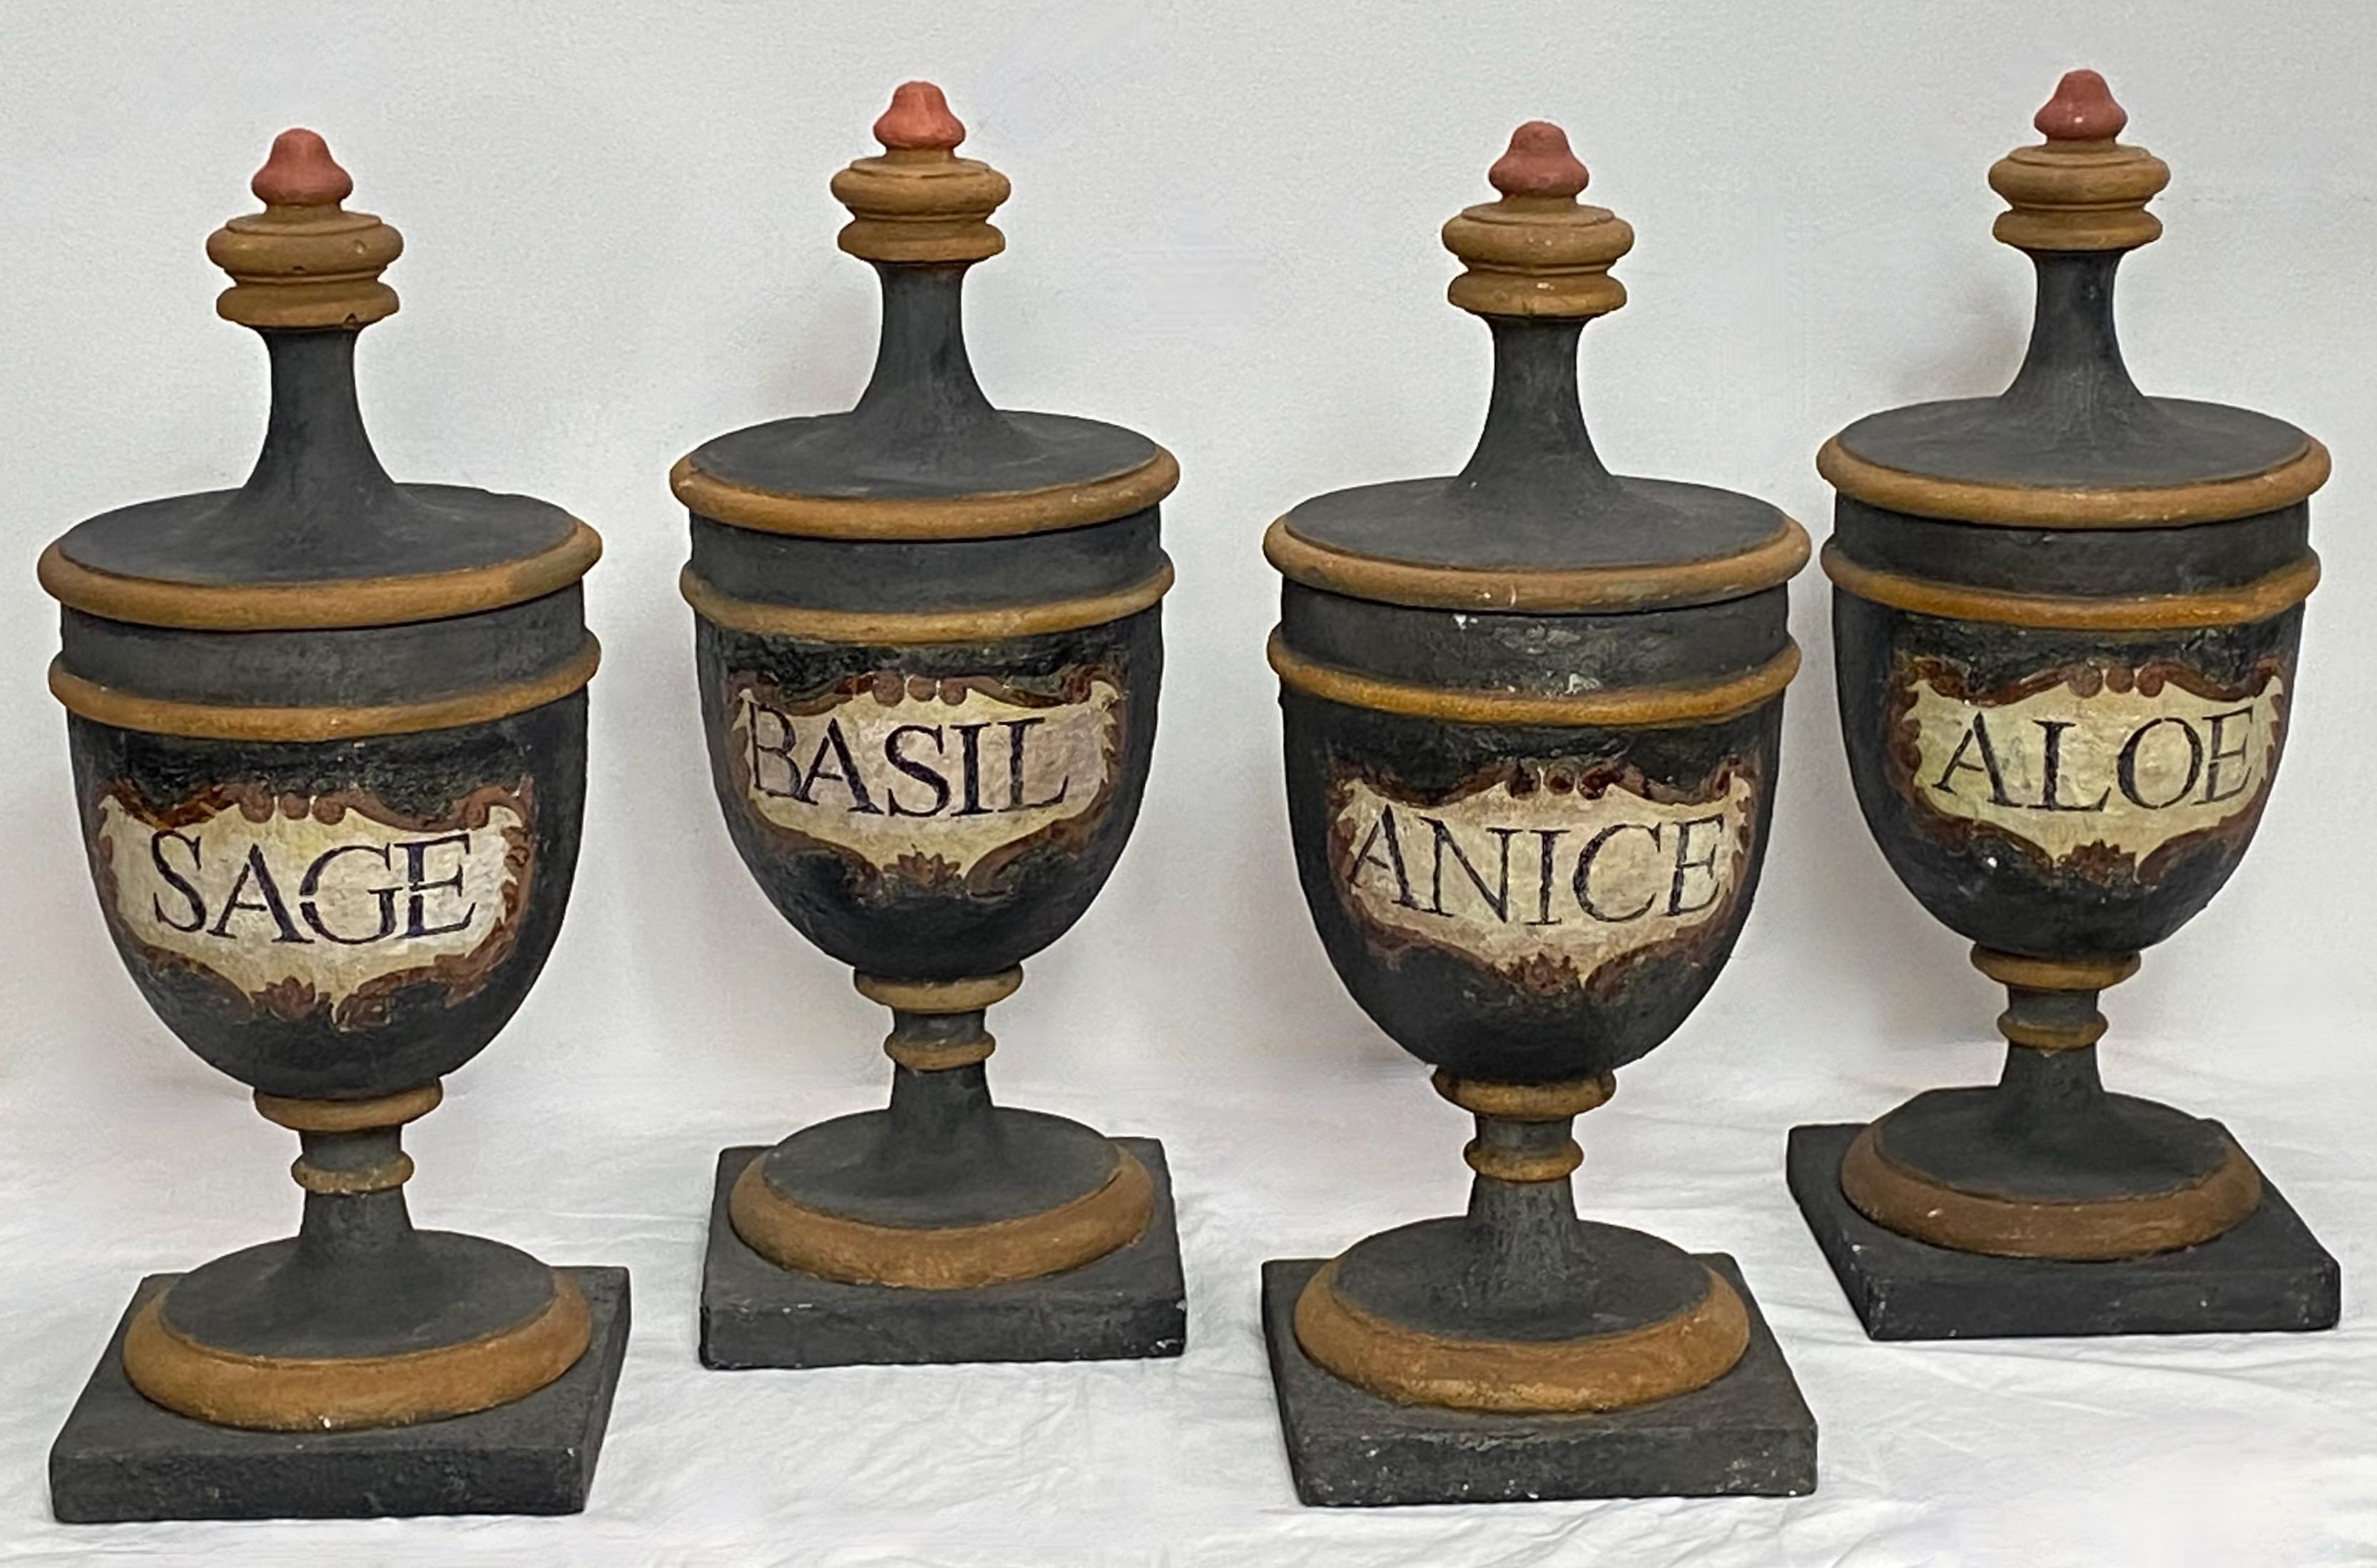 A wonderful set of large lidded urn shaped apothecary style spice jars, made from a low fired type of unglazed terracotta or earthenware. 
These jars have loads of character and presence with multiple layers of old paint and read